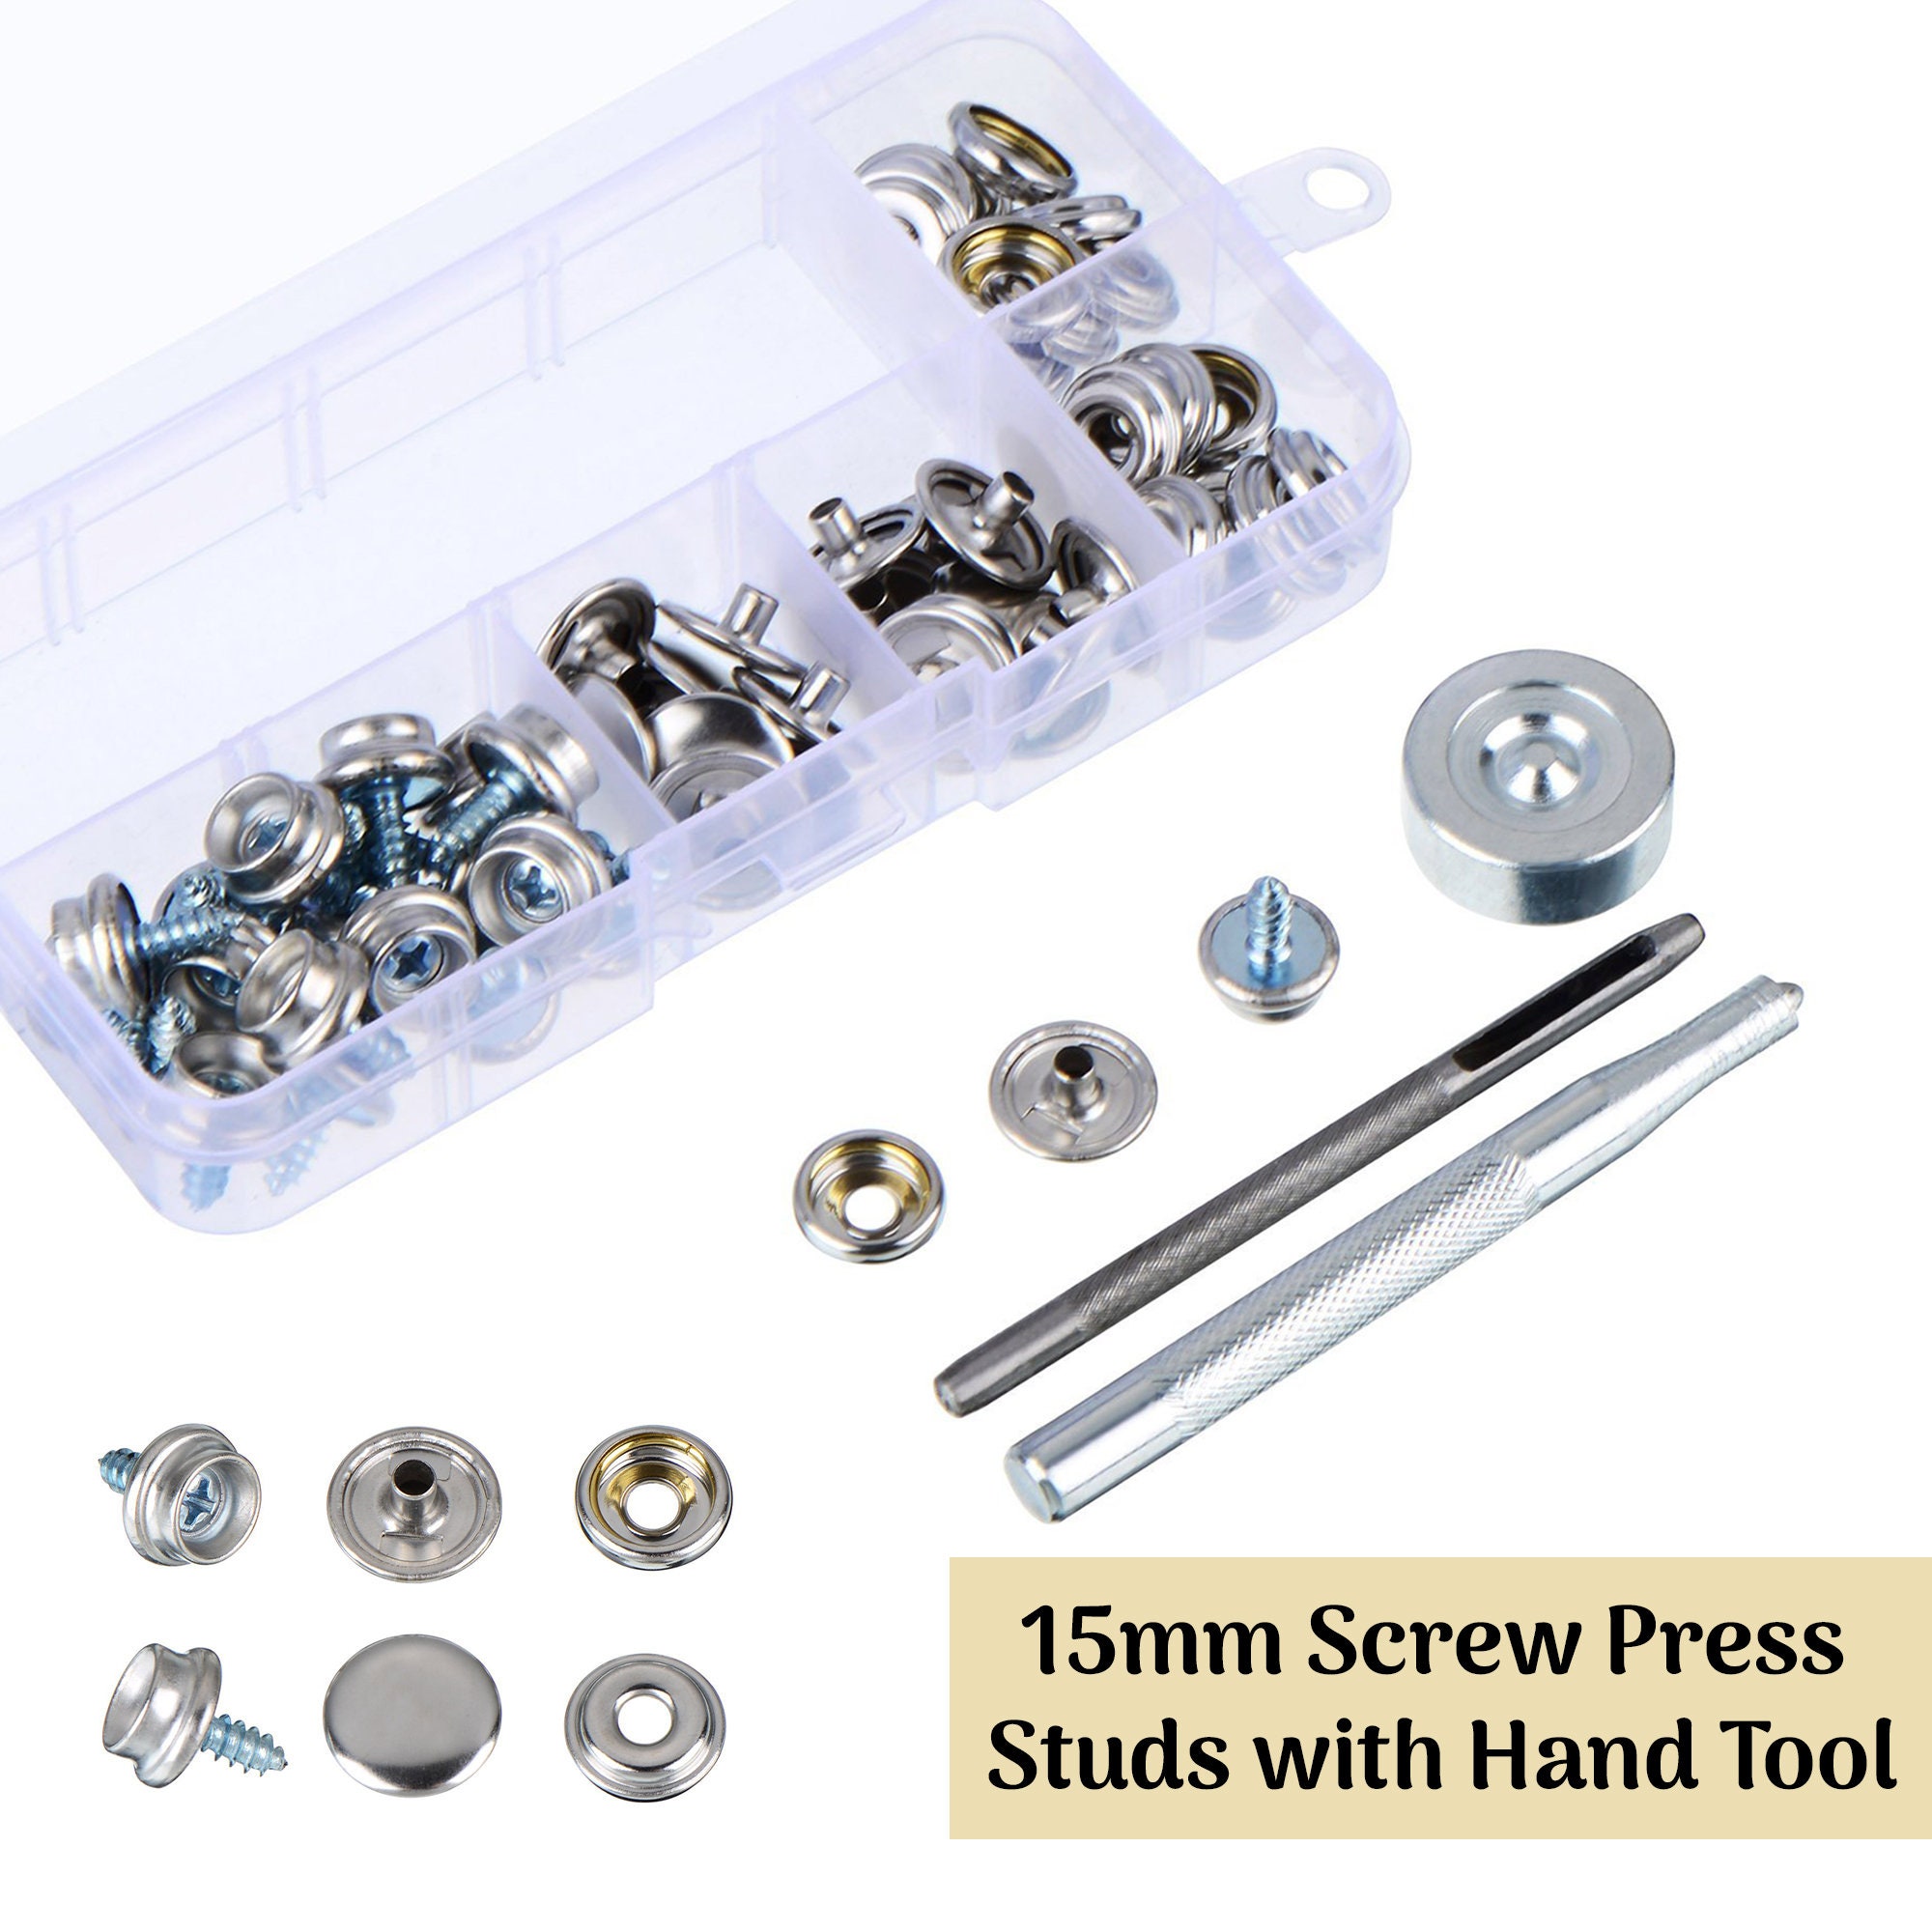 4 Part 15mm Snap Fasteners Kit With 3 Setting Tools, 10pcs Metal